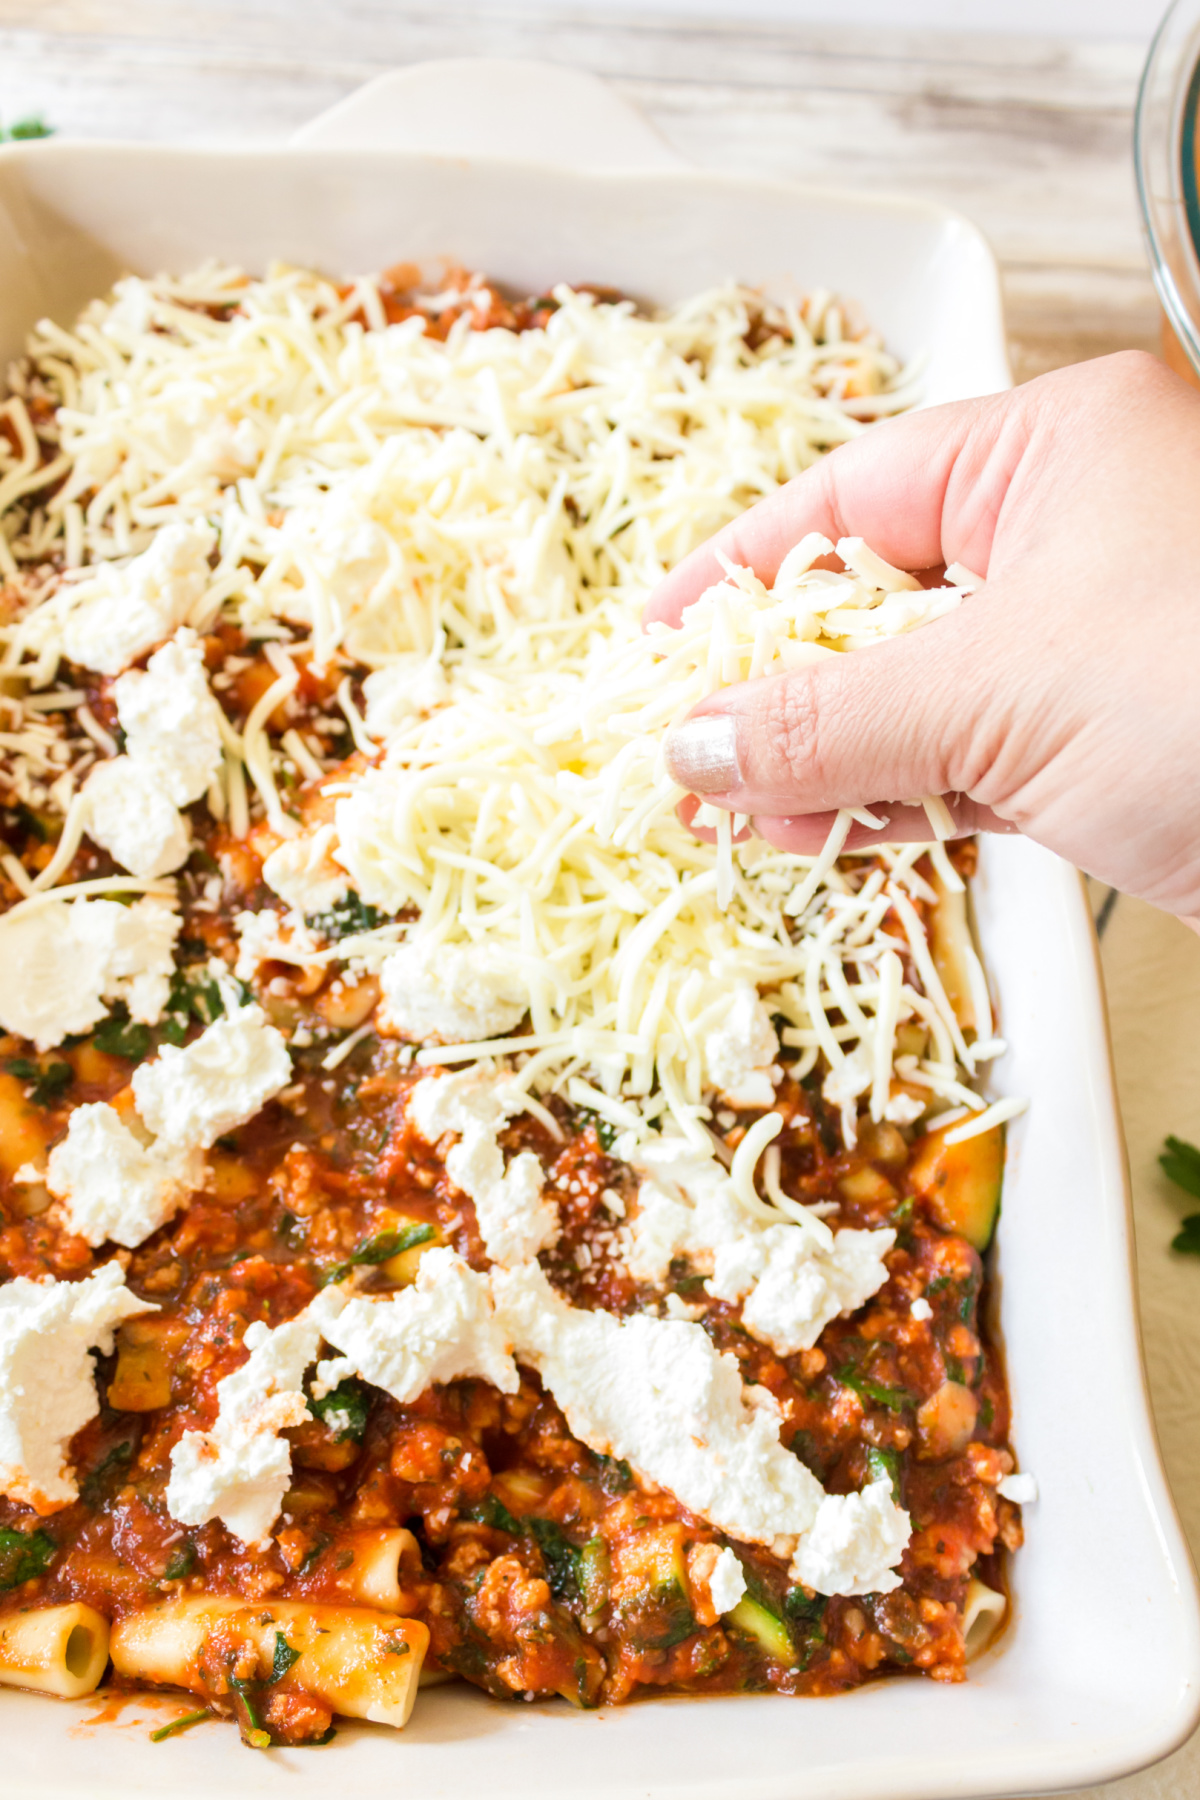 A person's hand sprinkling shredded cheese over a baking dish filled with a pasta dish.